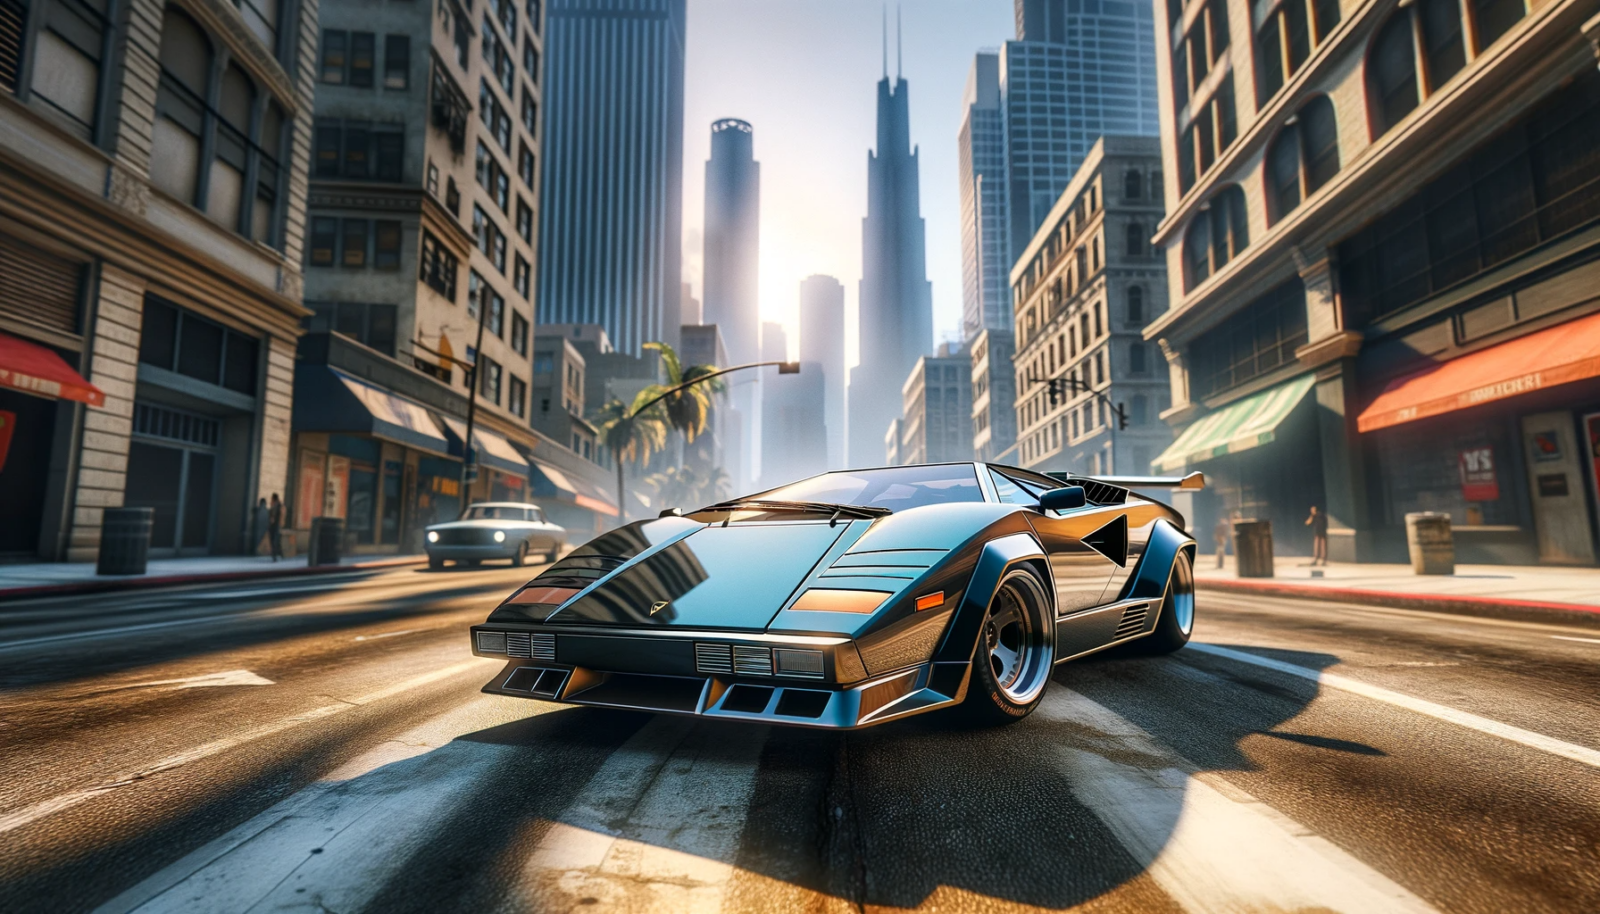 Dall·e 2023 12 13 20. 04. 58 a dynamic and detailed scene showcasing a lamborghini countach in a realistic urban environment similar to the world of gta 5. The car should be depi